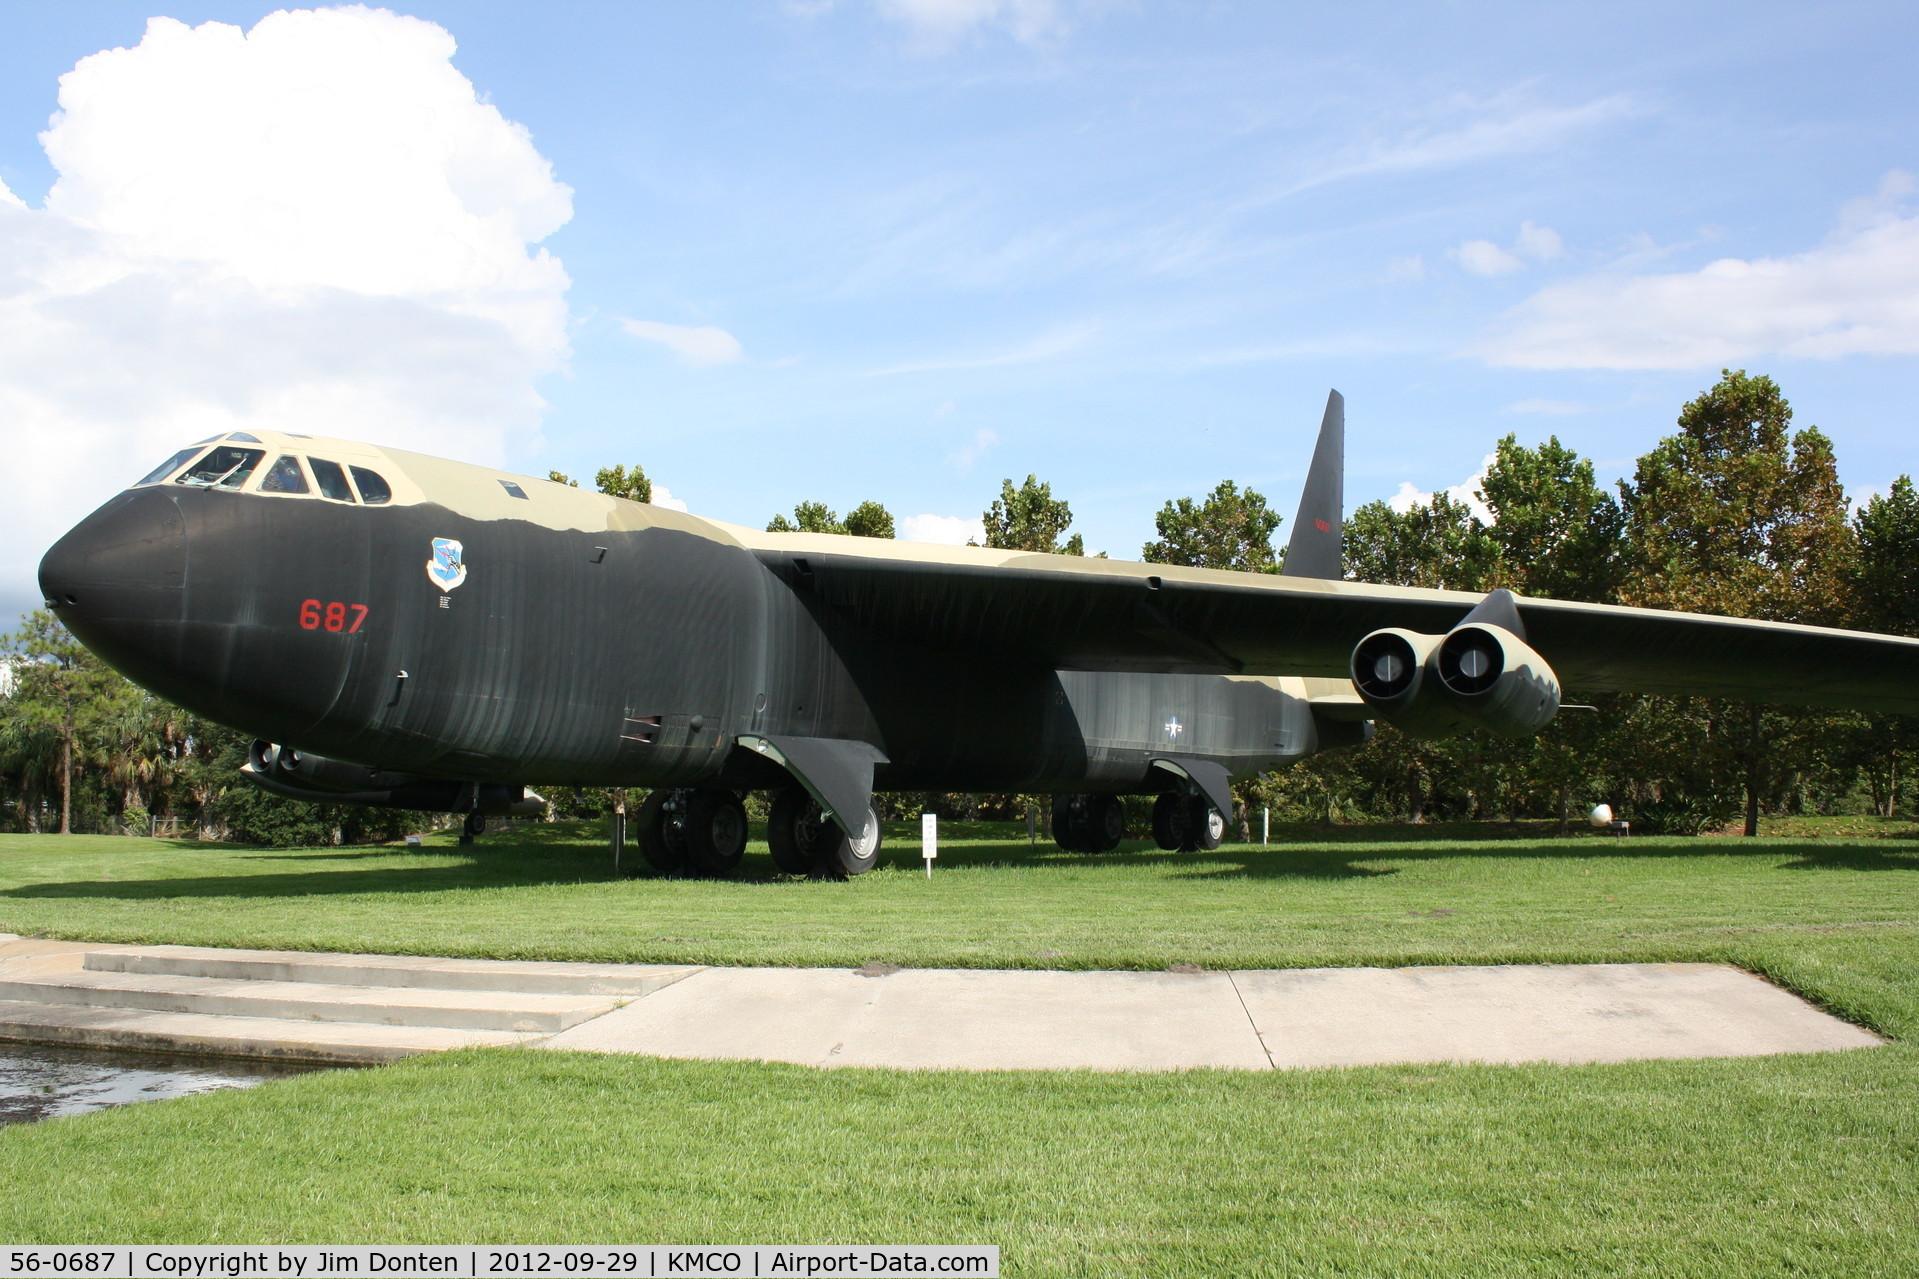 56-0687, 1956 Boeing B-52D Stratofortress C/N 464058, A B-52 Stratofortress sits in B-52 Memorial Park